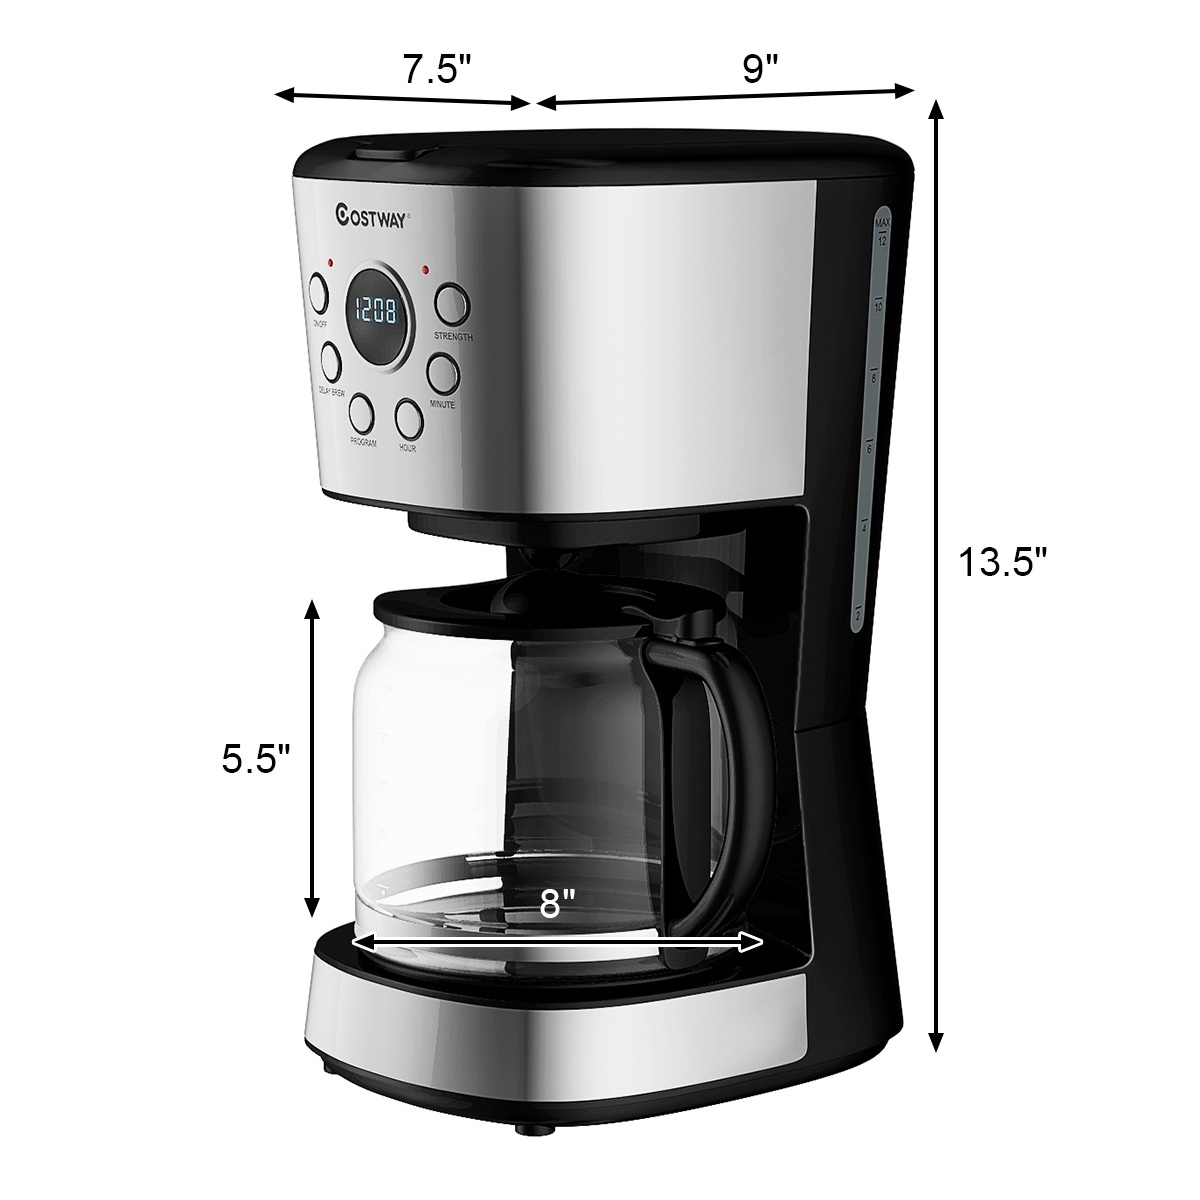 https://ak1.ostkcdn.com/images/products/30645426/12-Cup-Programmable-Coffee-Maker-with-LCD-Display-24hrs-Timer-0312a9d9-873b-40be-a57d-6f9774ac9253.jpg